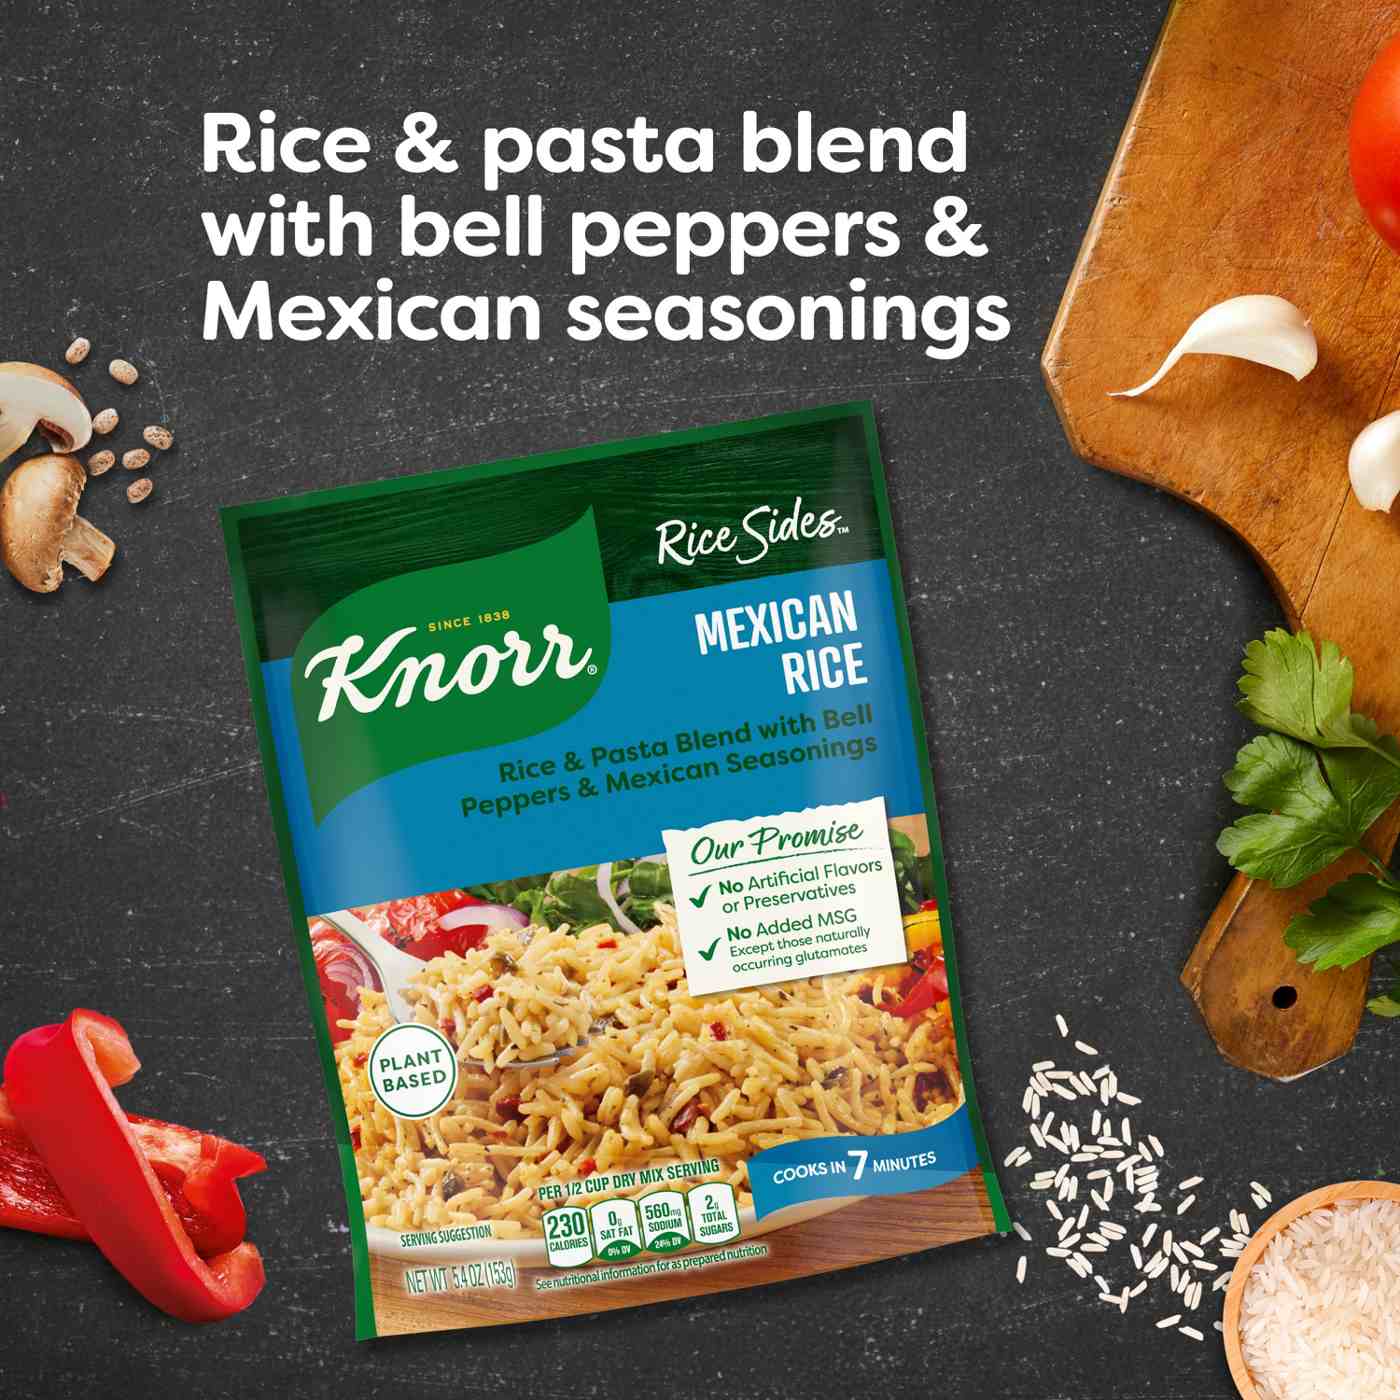 Knorr Rice Sides Mexican Rice; image 6 of 10